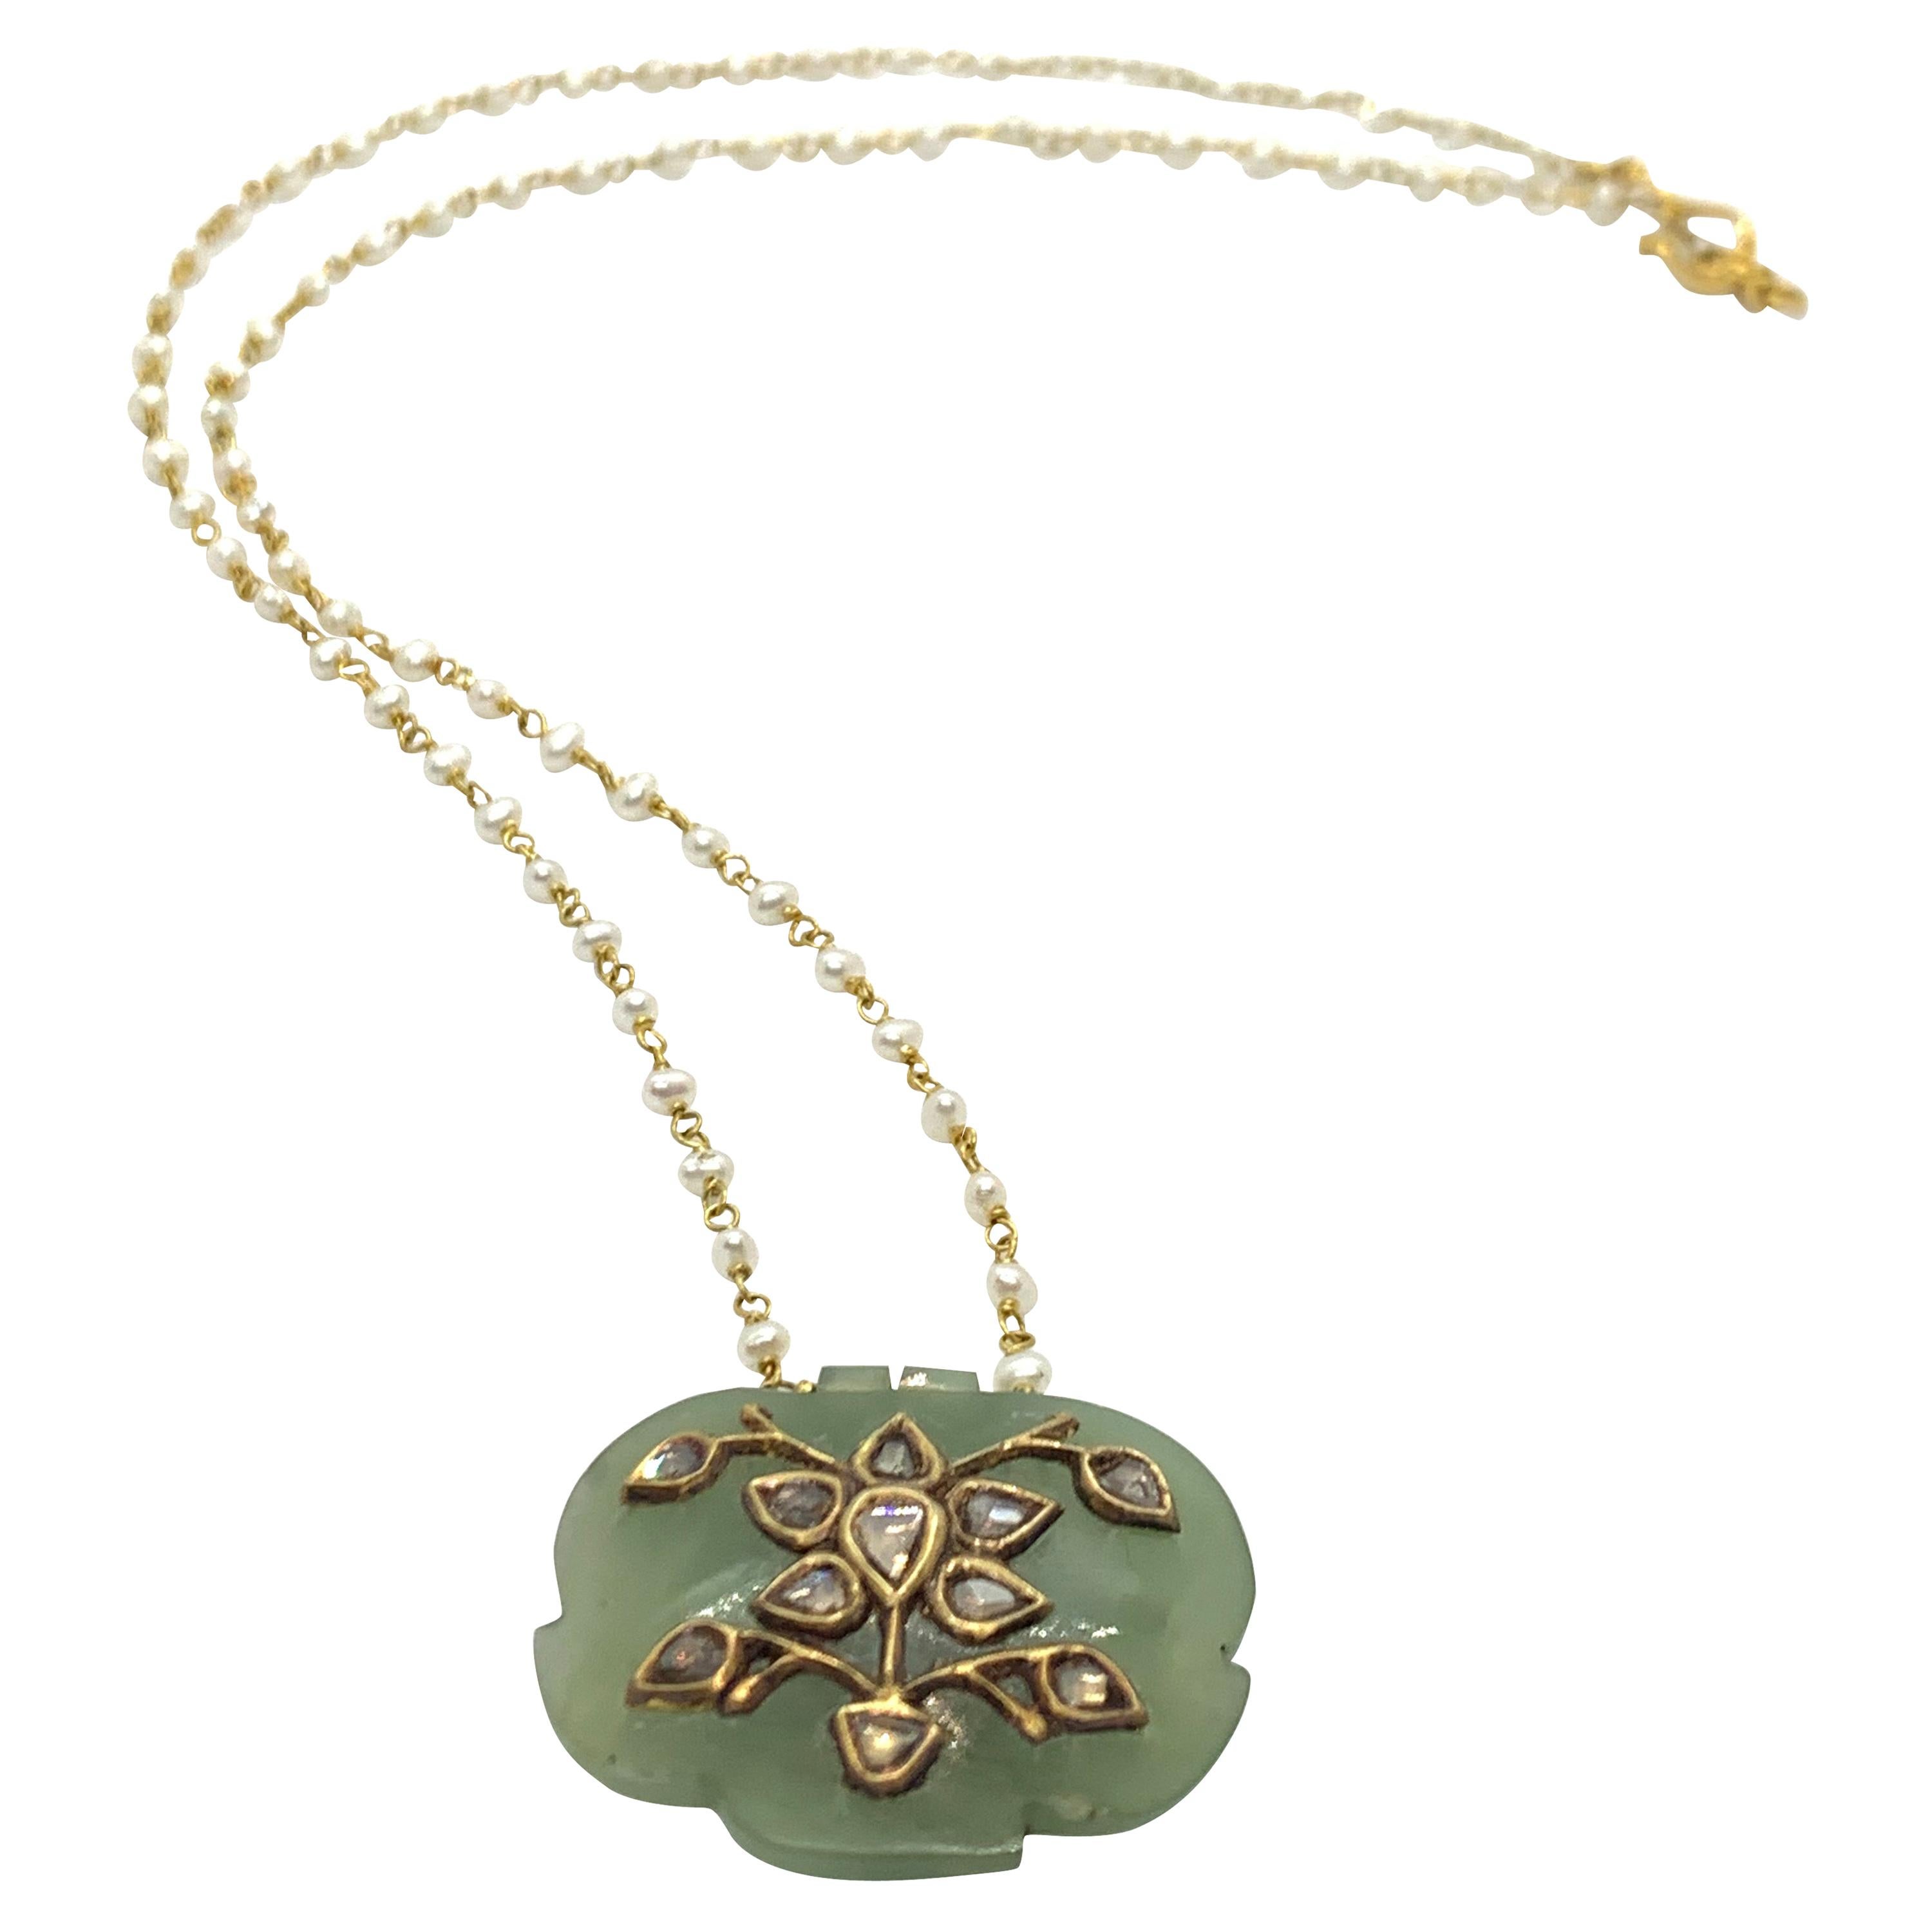 Jade Pendant Studded with Diamonds Strung in a Chain with Pearls and 18K Gold